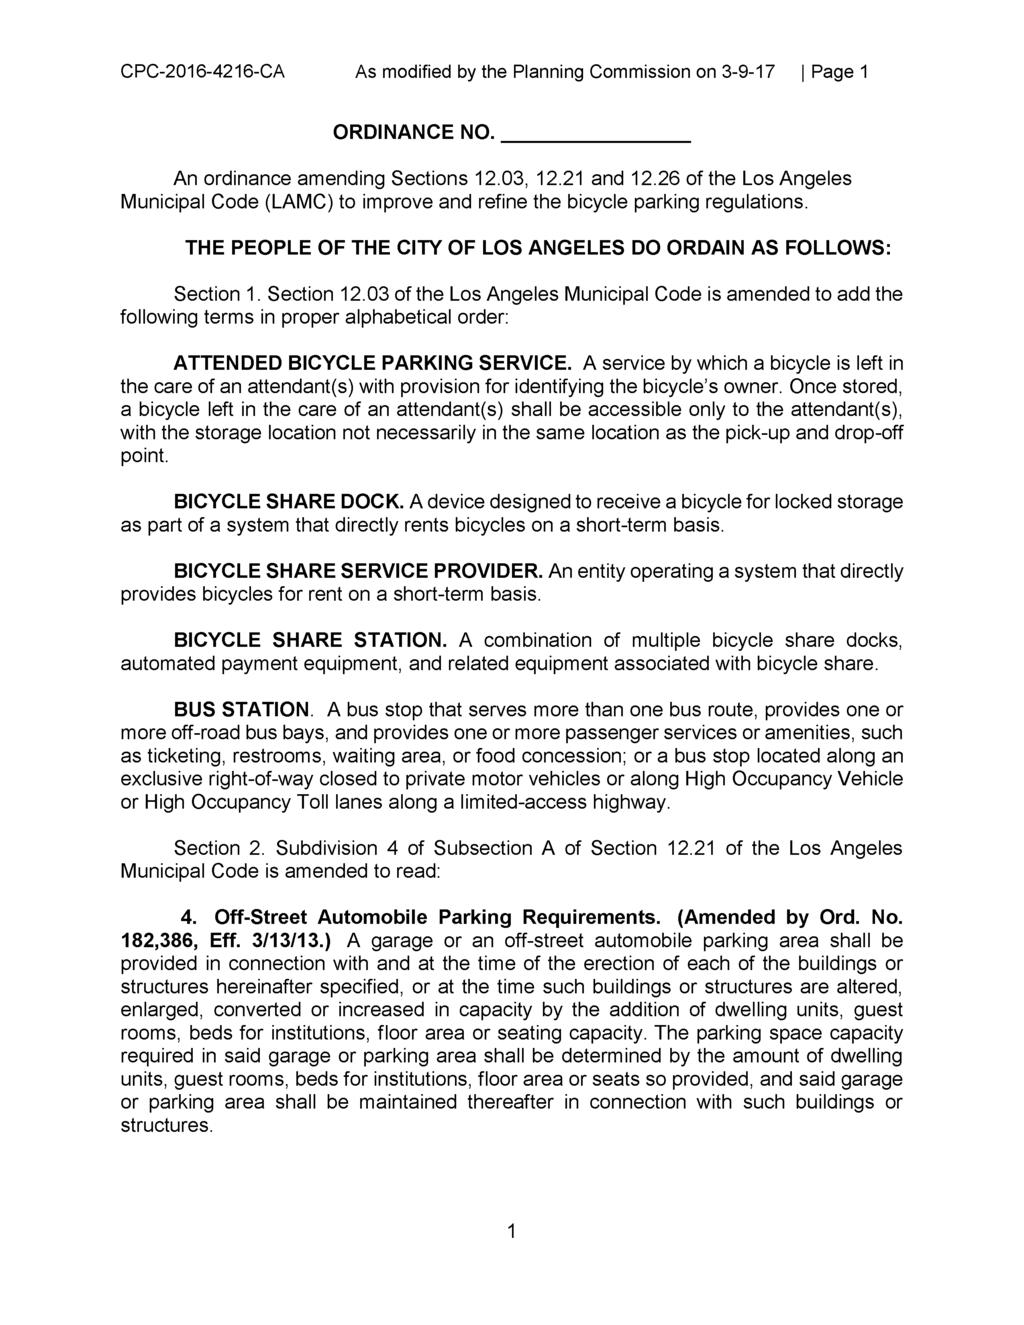 CPC-2016-4216-CA As modified by the Planning Commission on 3-9-17 Page 1 ORDINANCE NO. An ordinance amending Sections 12.03, 12.21 and 12.